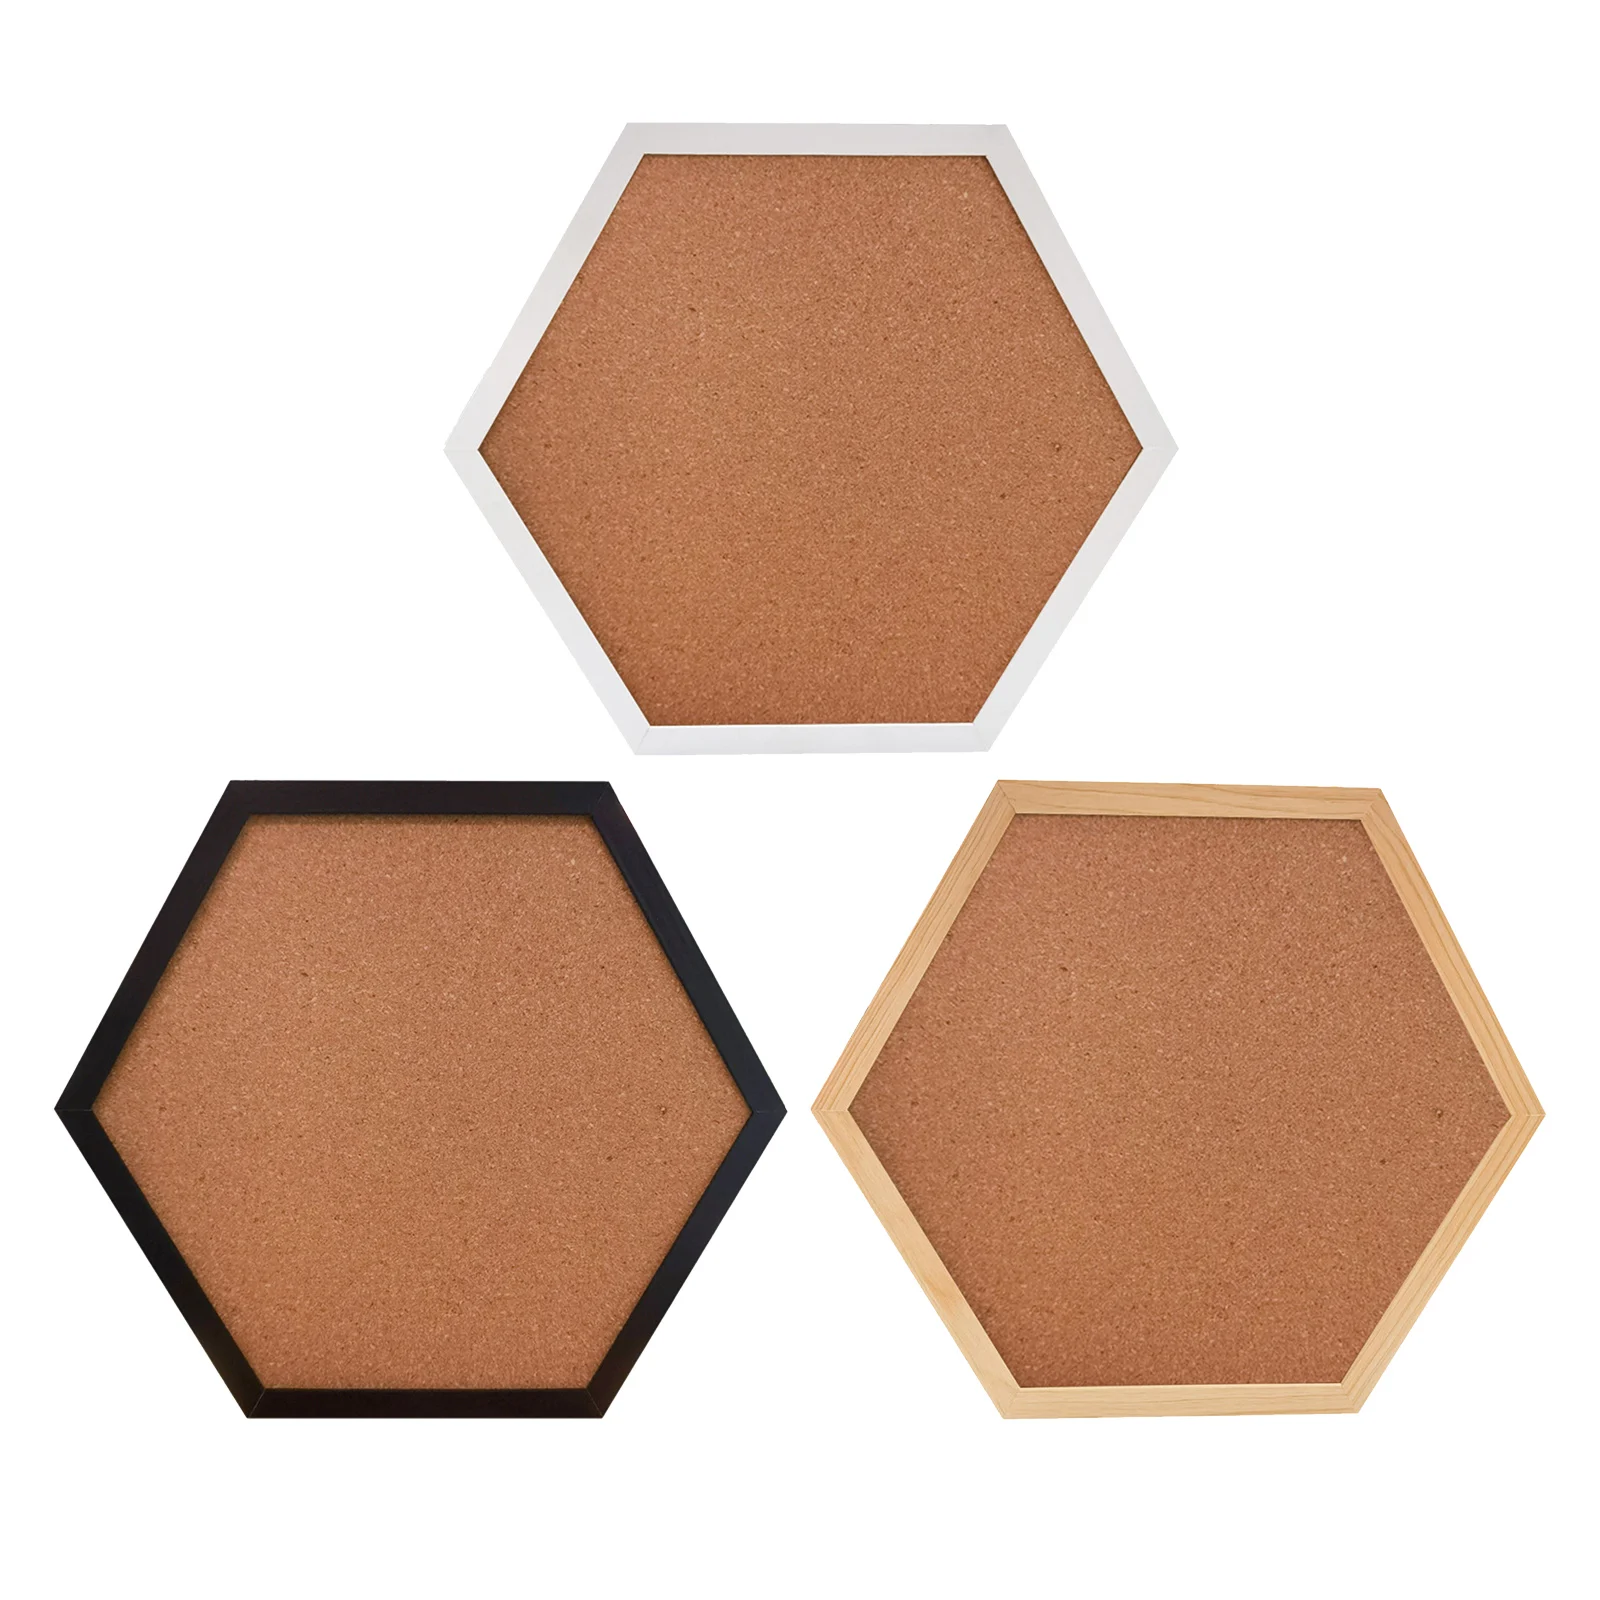 Multifunction Cork Board Office Home Wood Photo Background Hexagon Stickers Wall Message Drawing Bulletin